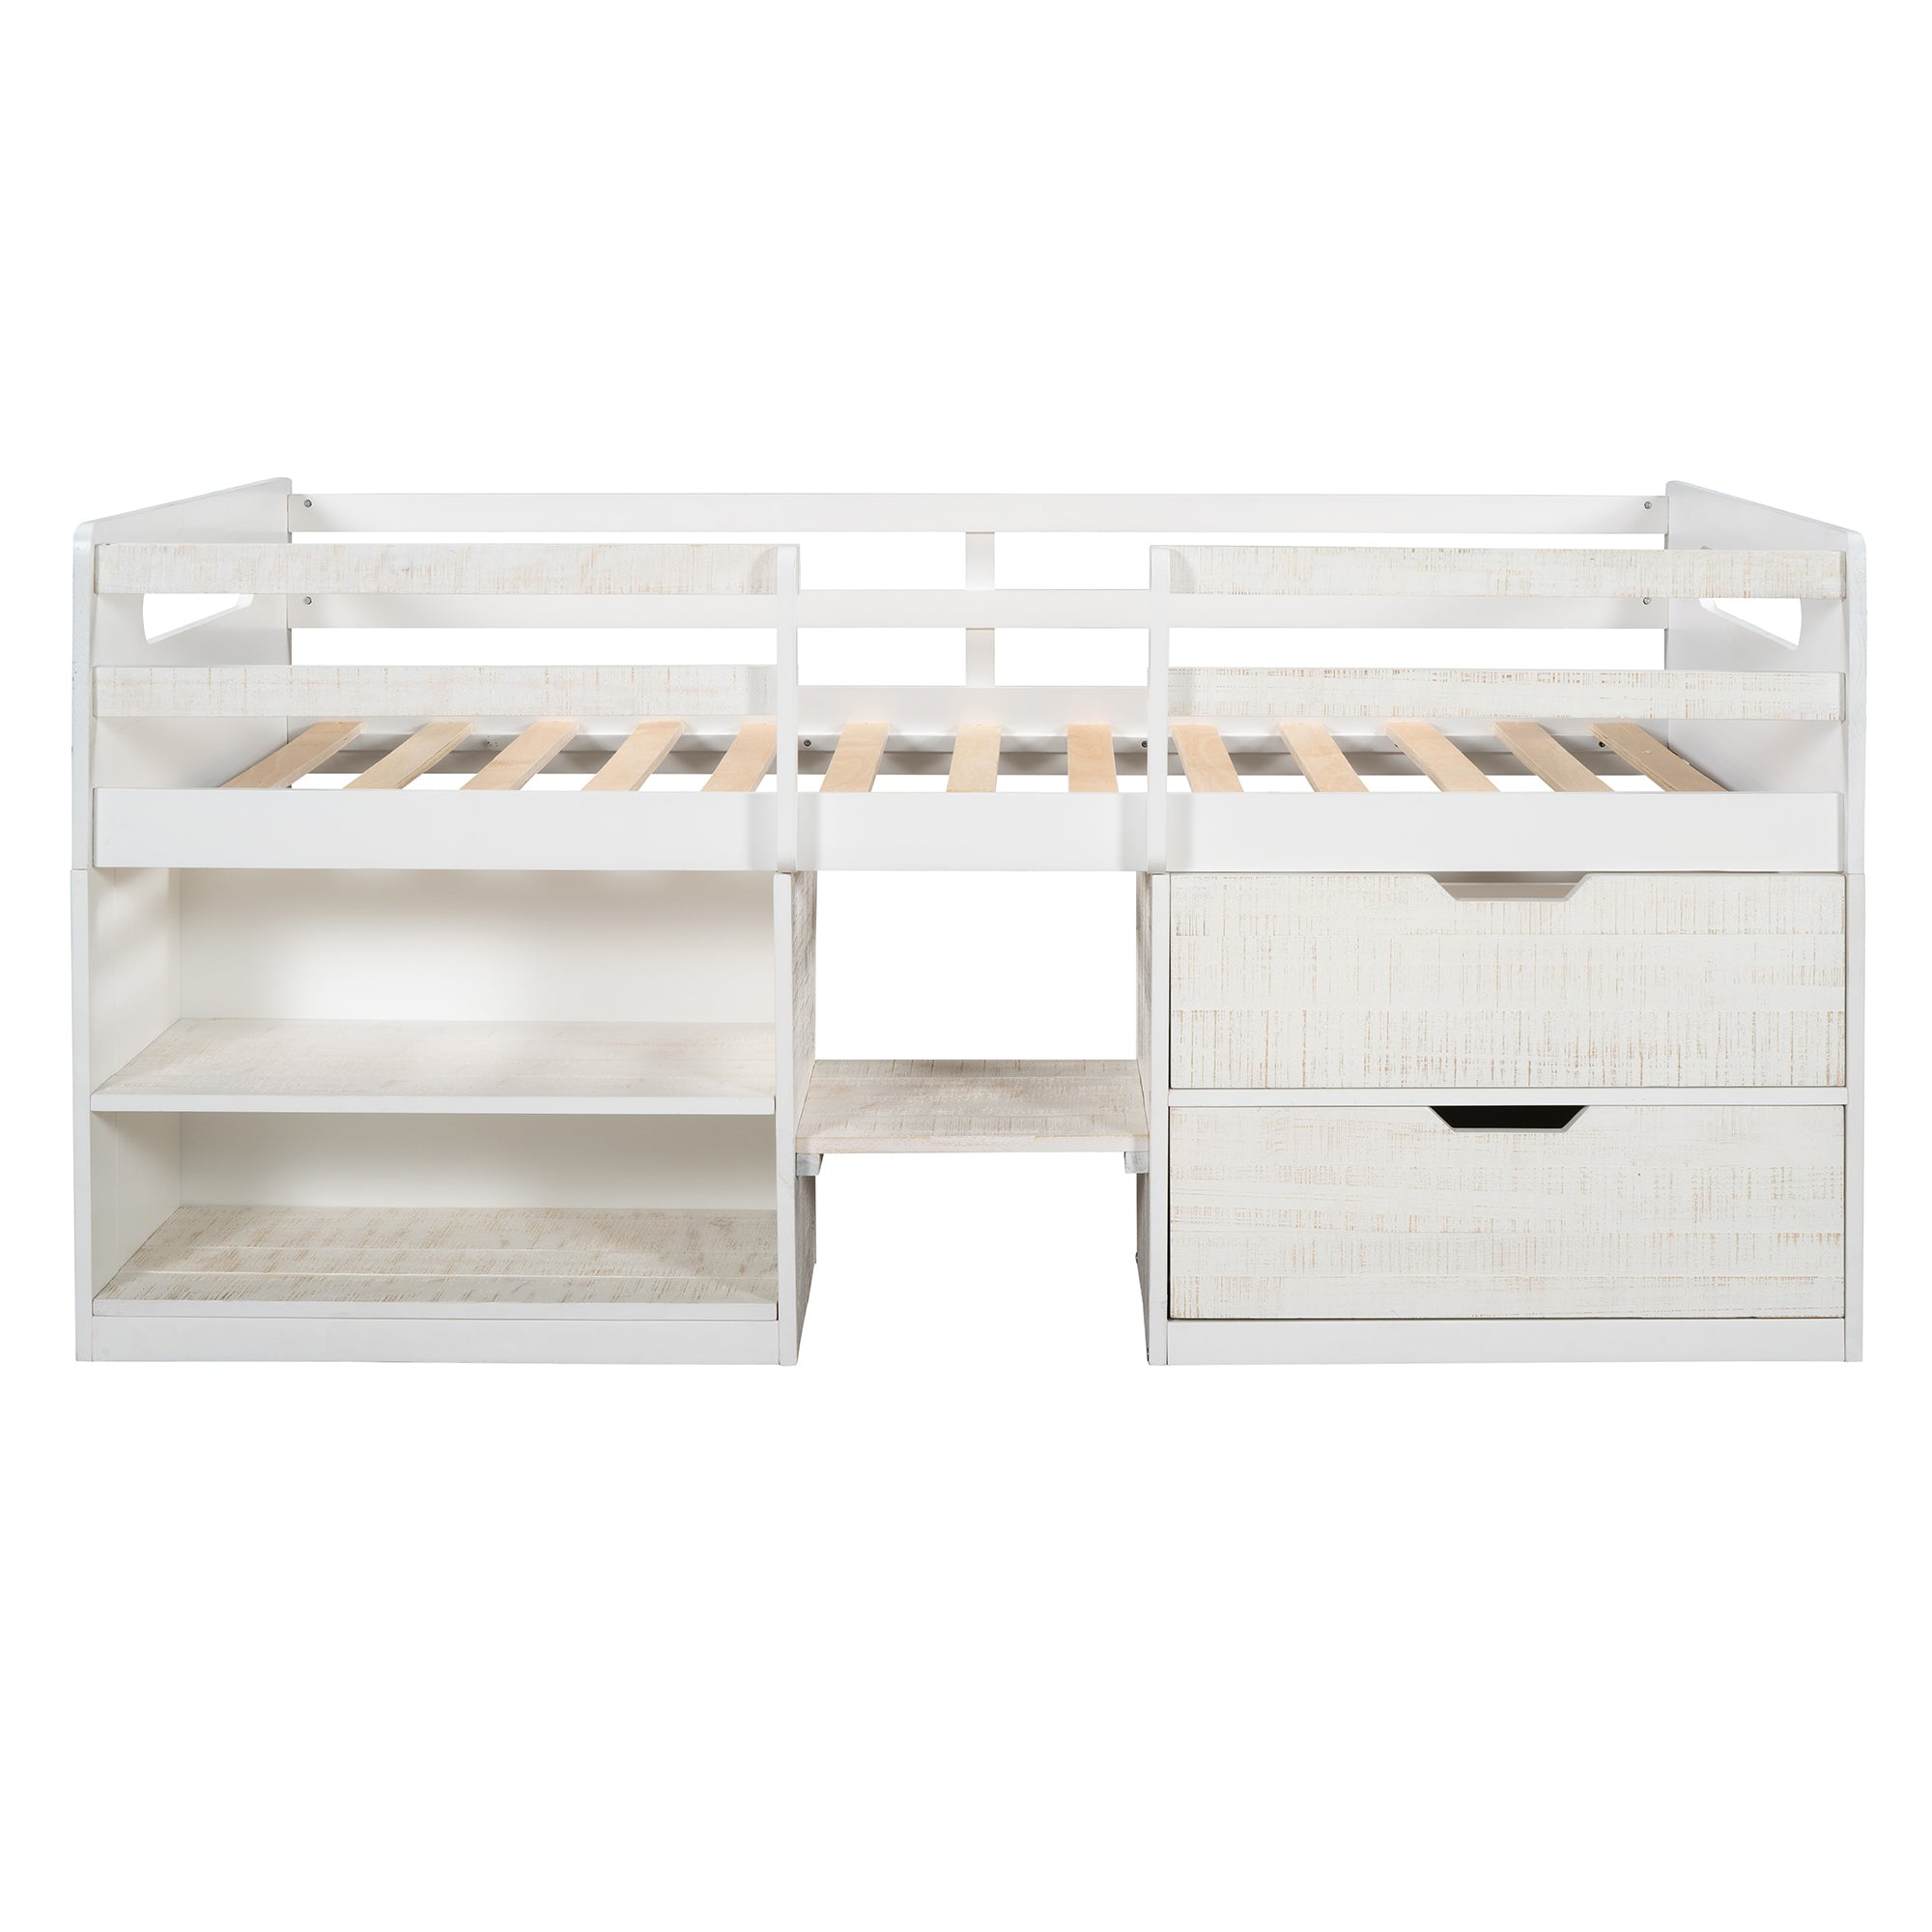 Twin size Loft Bed with Two Shelves and Two drawers (Antique White)